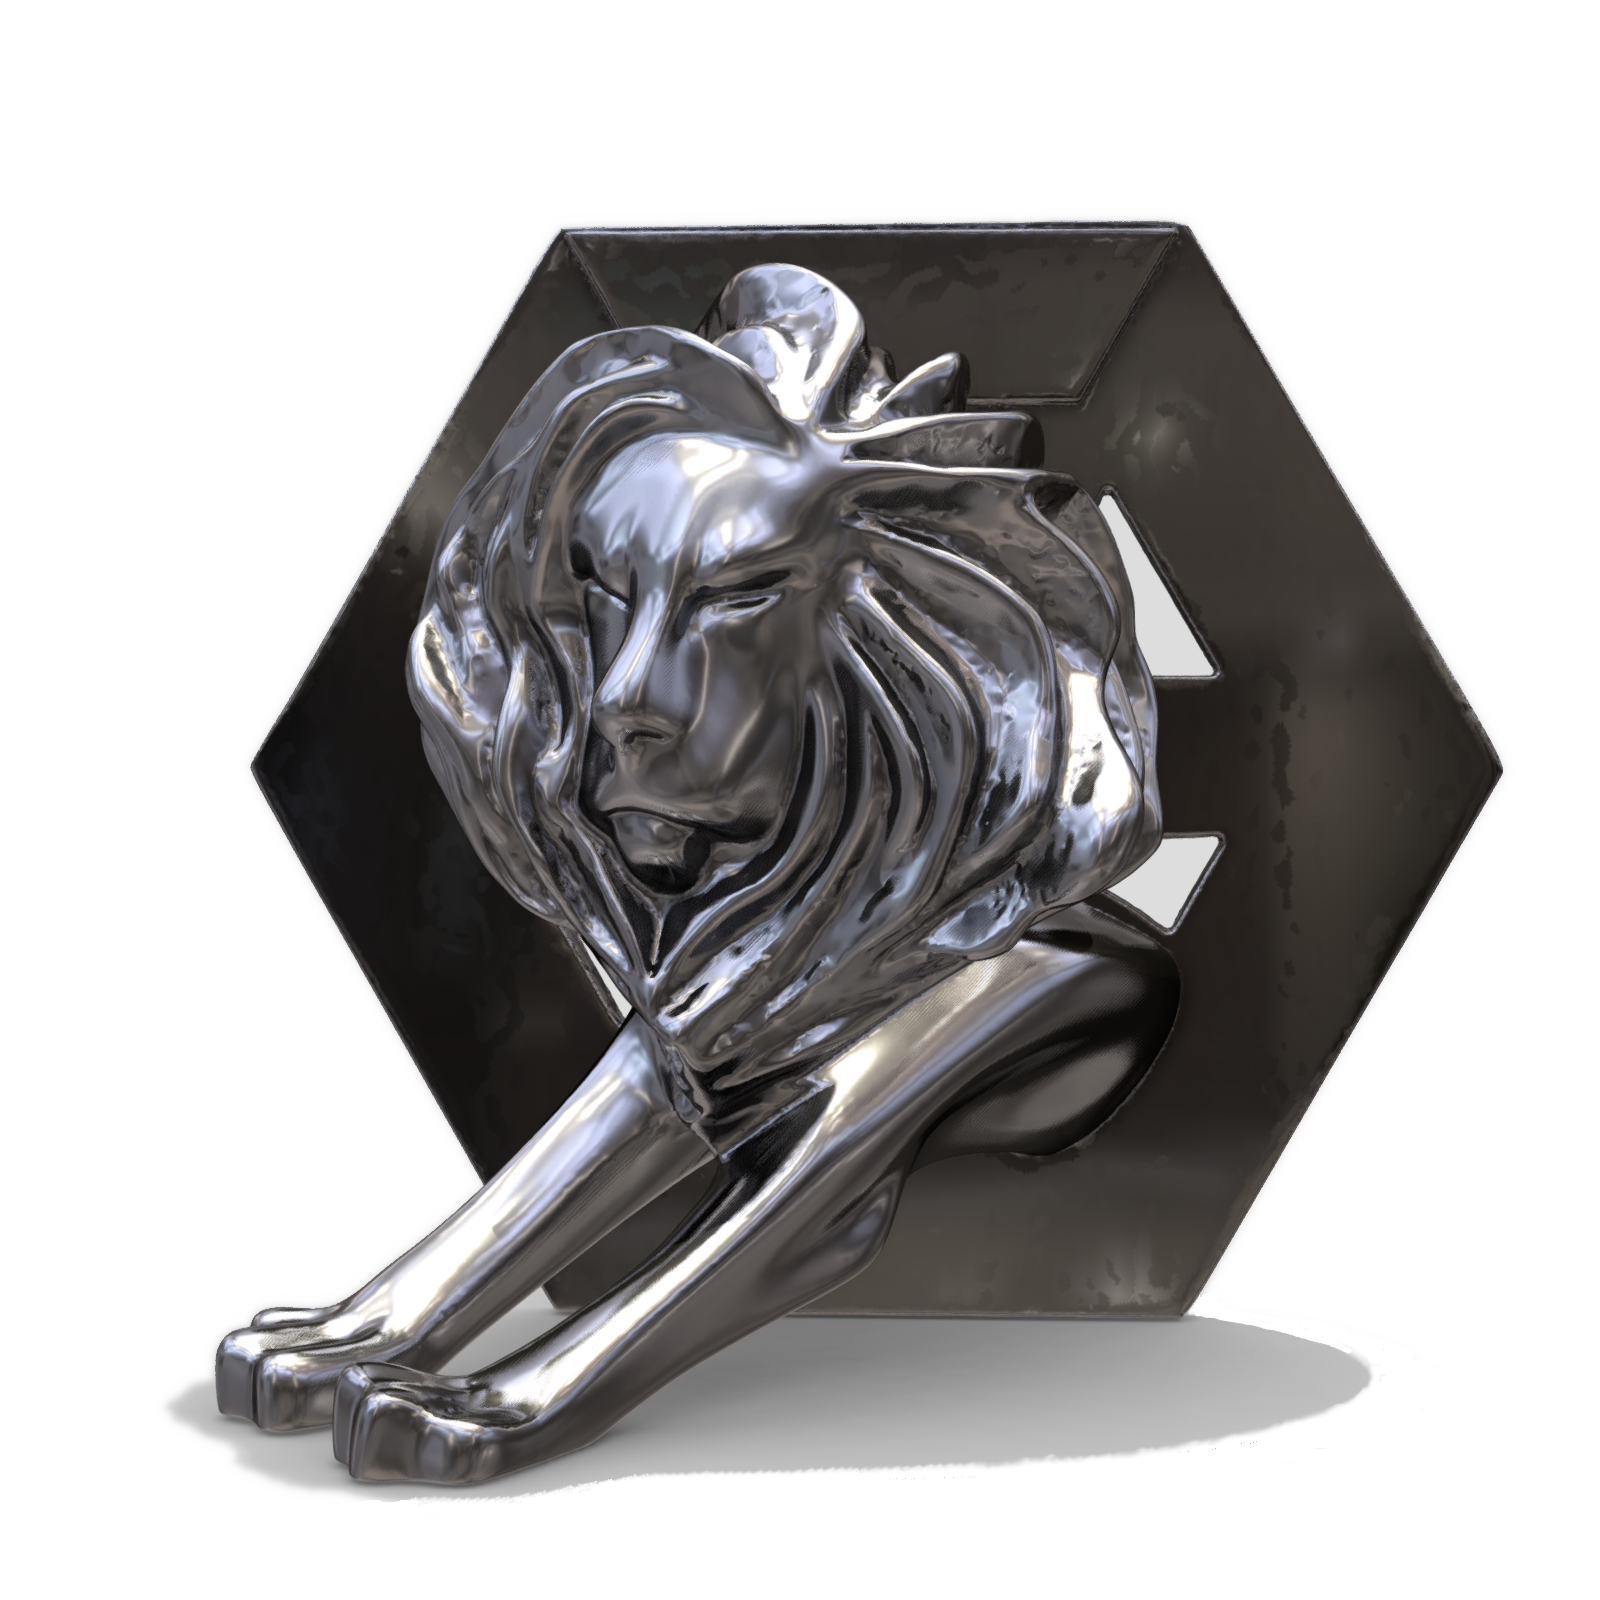 Image of the Cannes Silver Lion